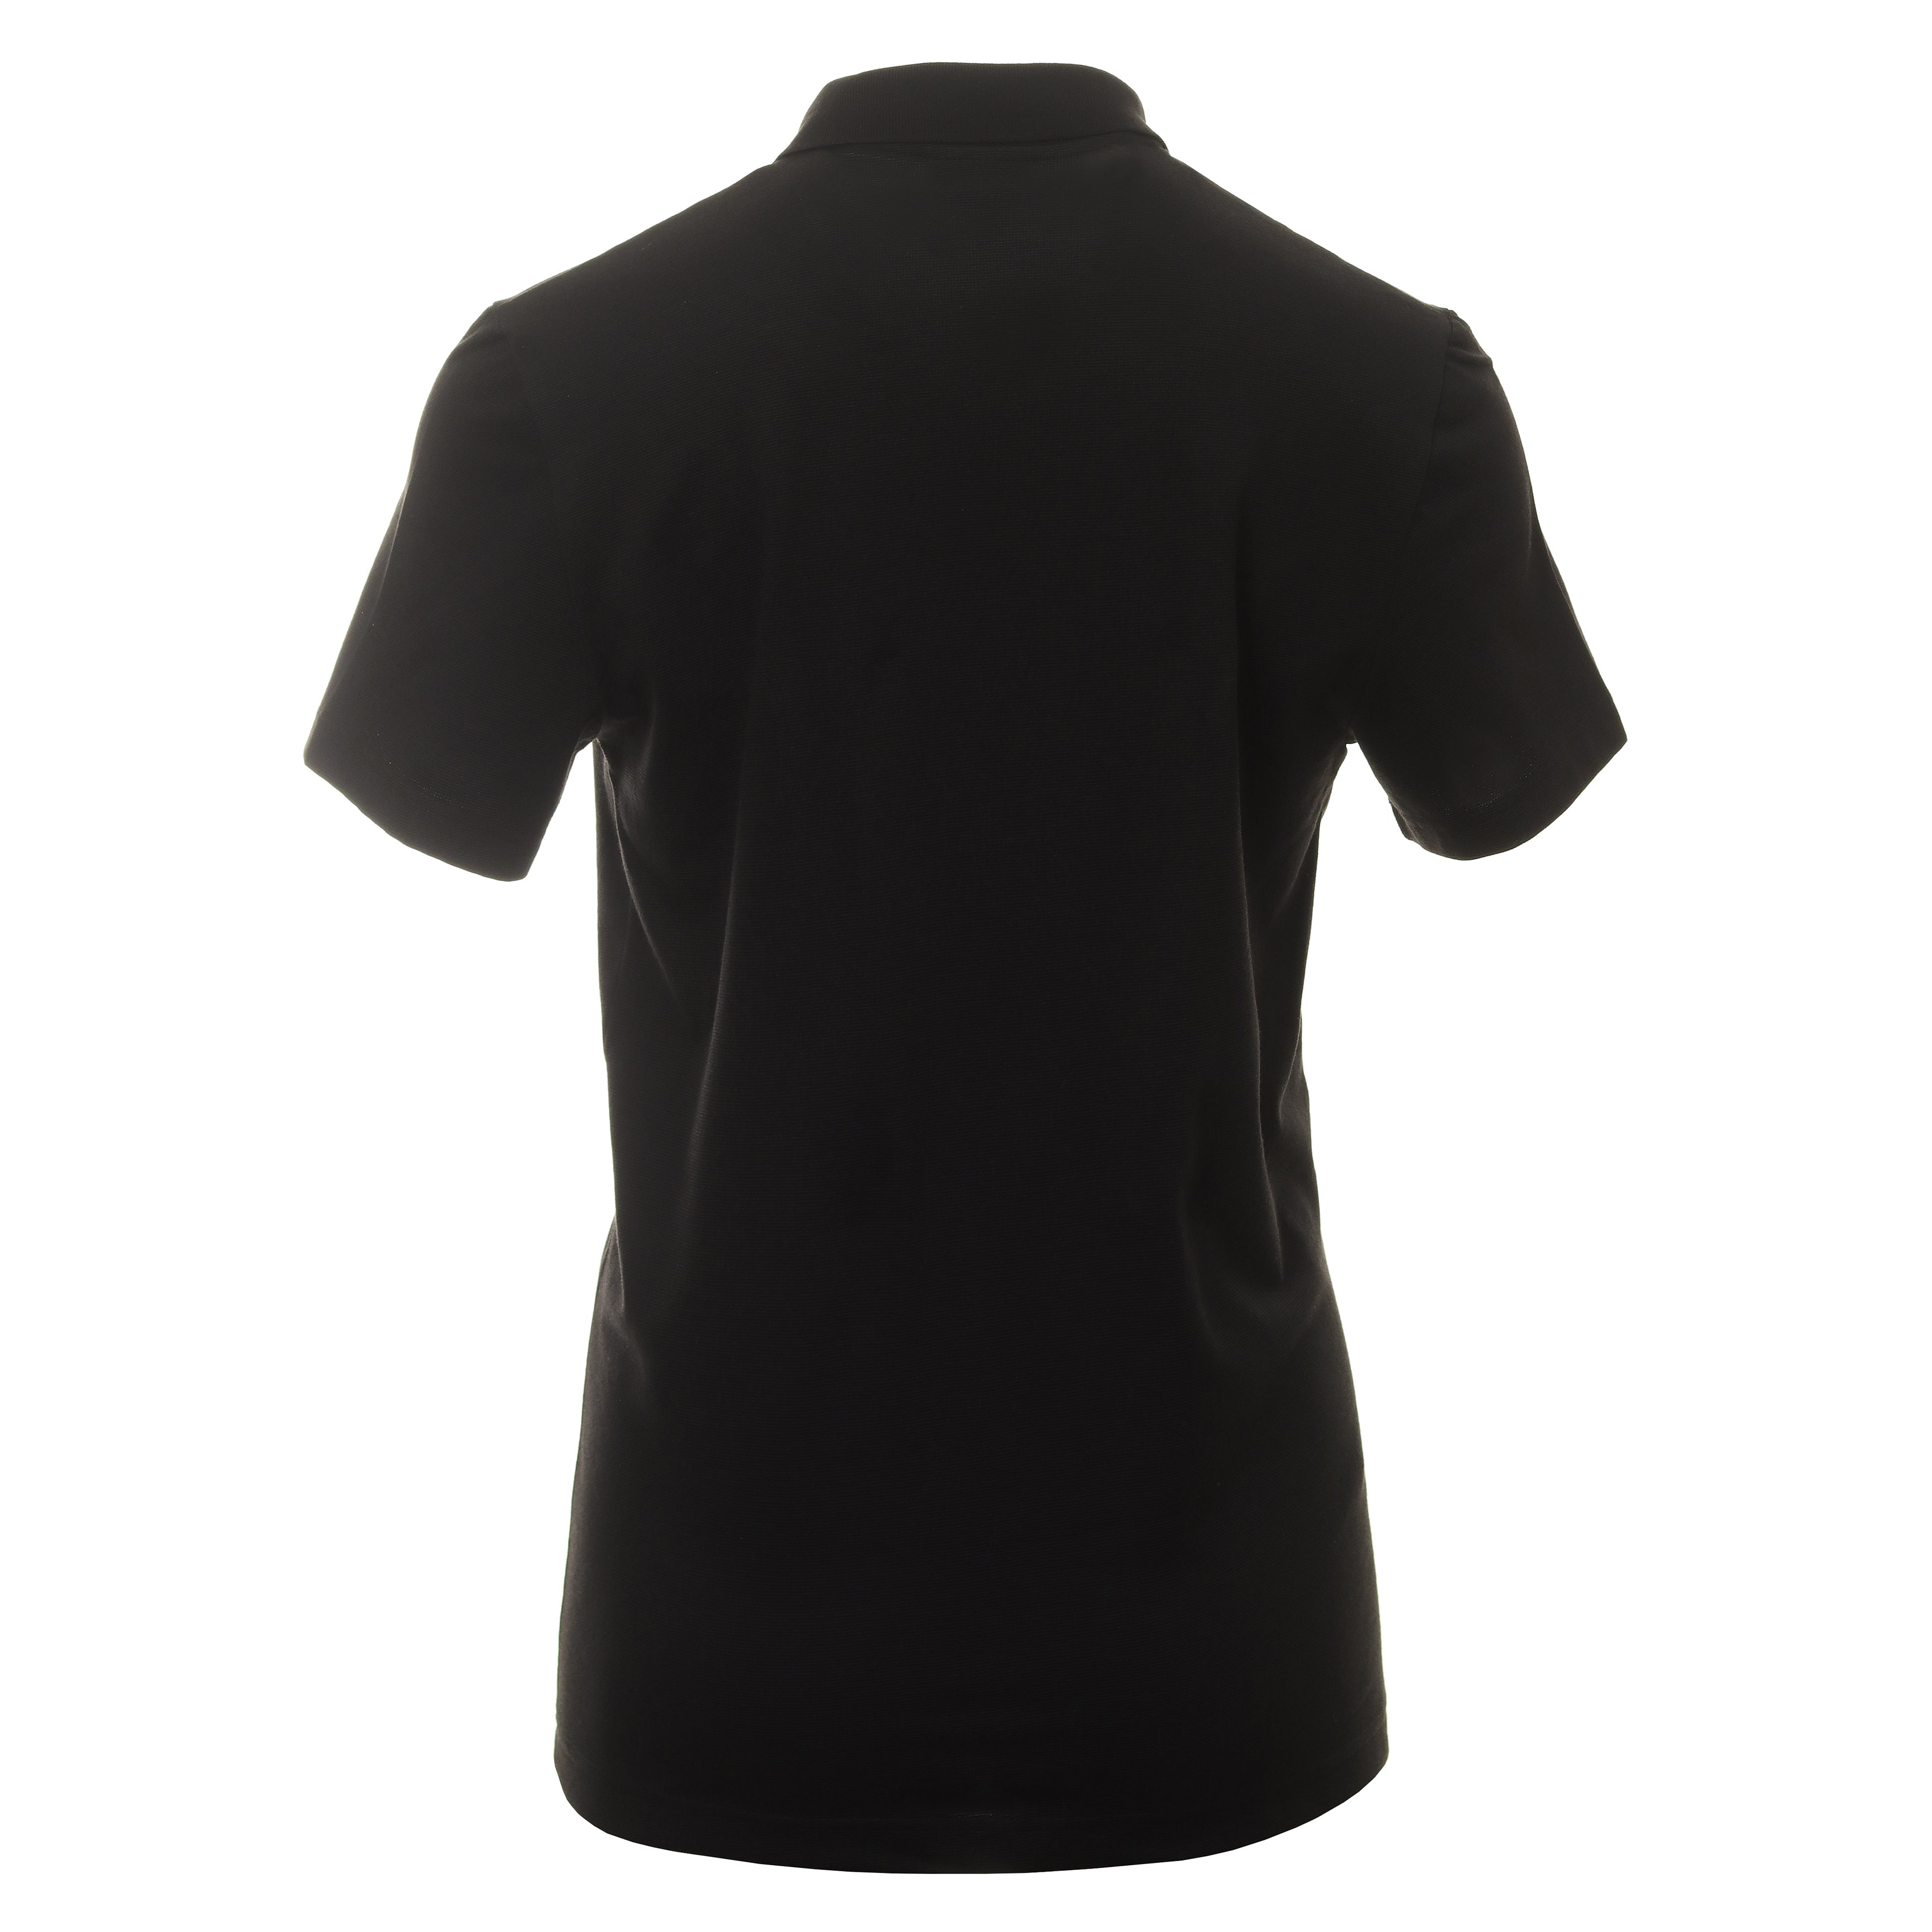 Lacoste Organic Cotton Stretch Polo Shirt DH0783 Black 031 | Function18